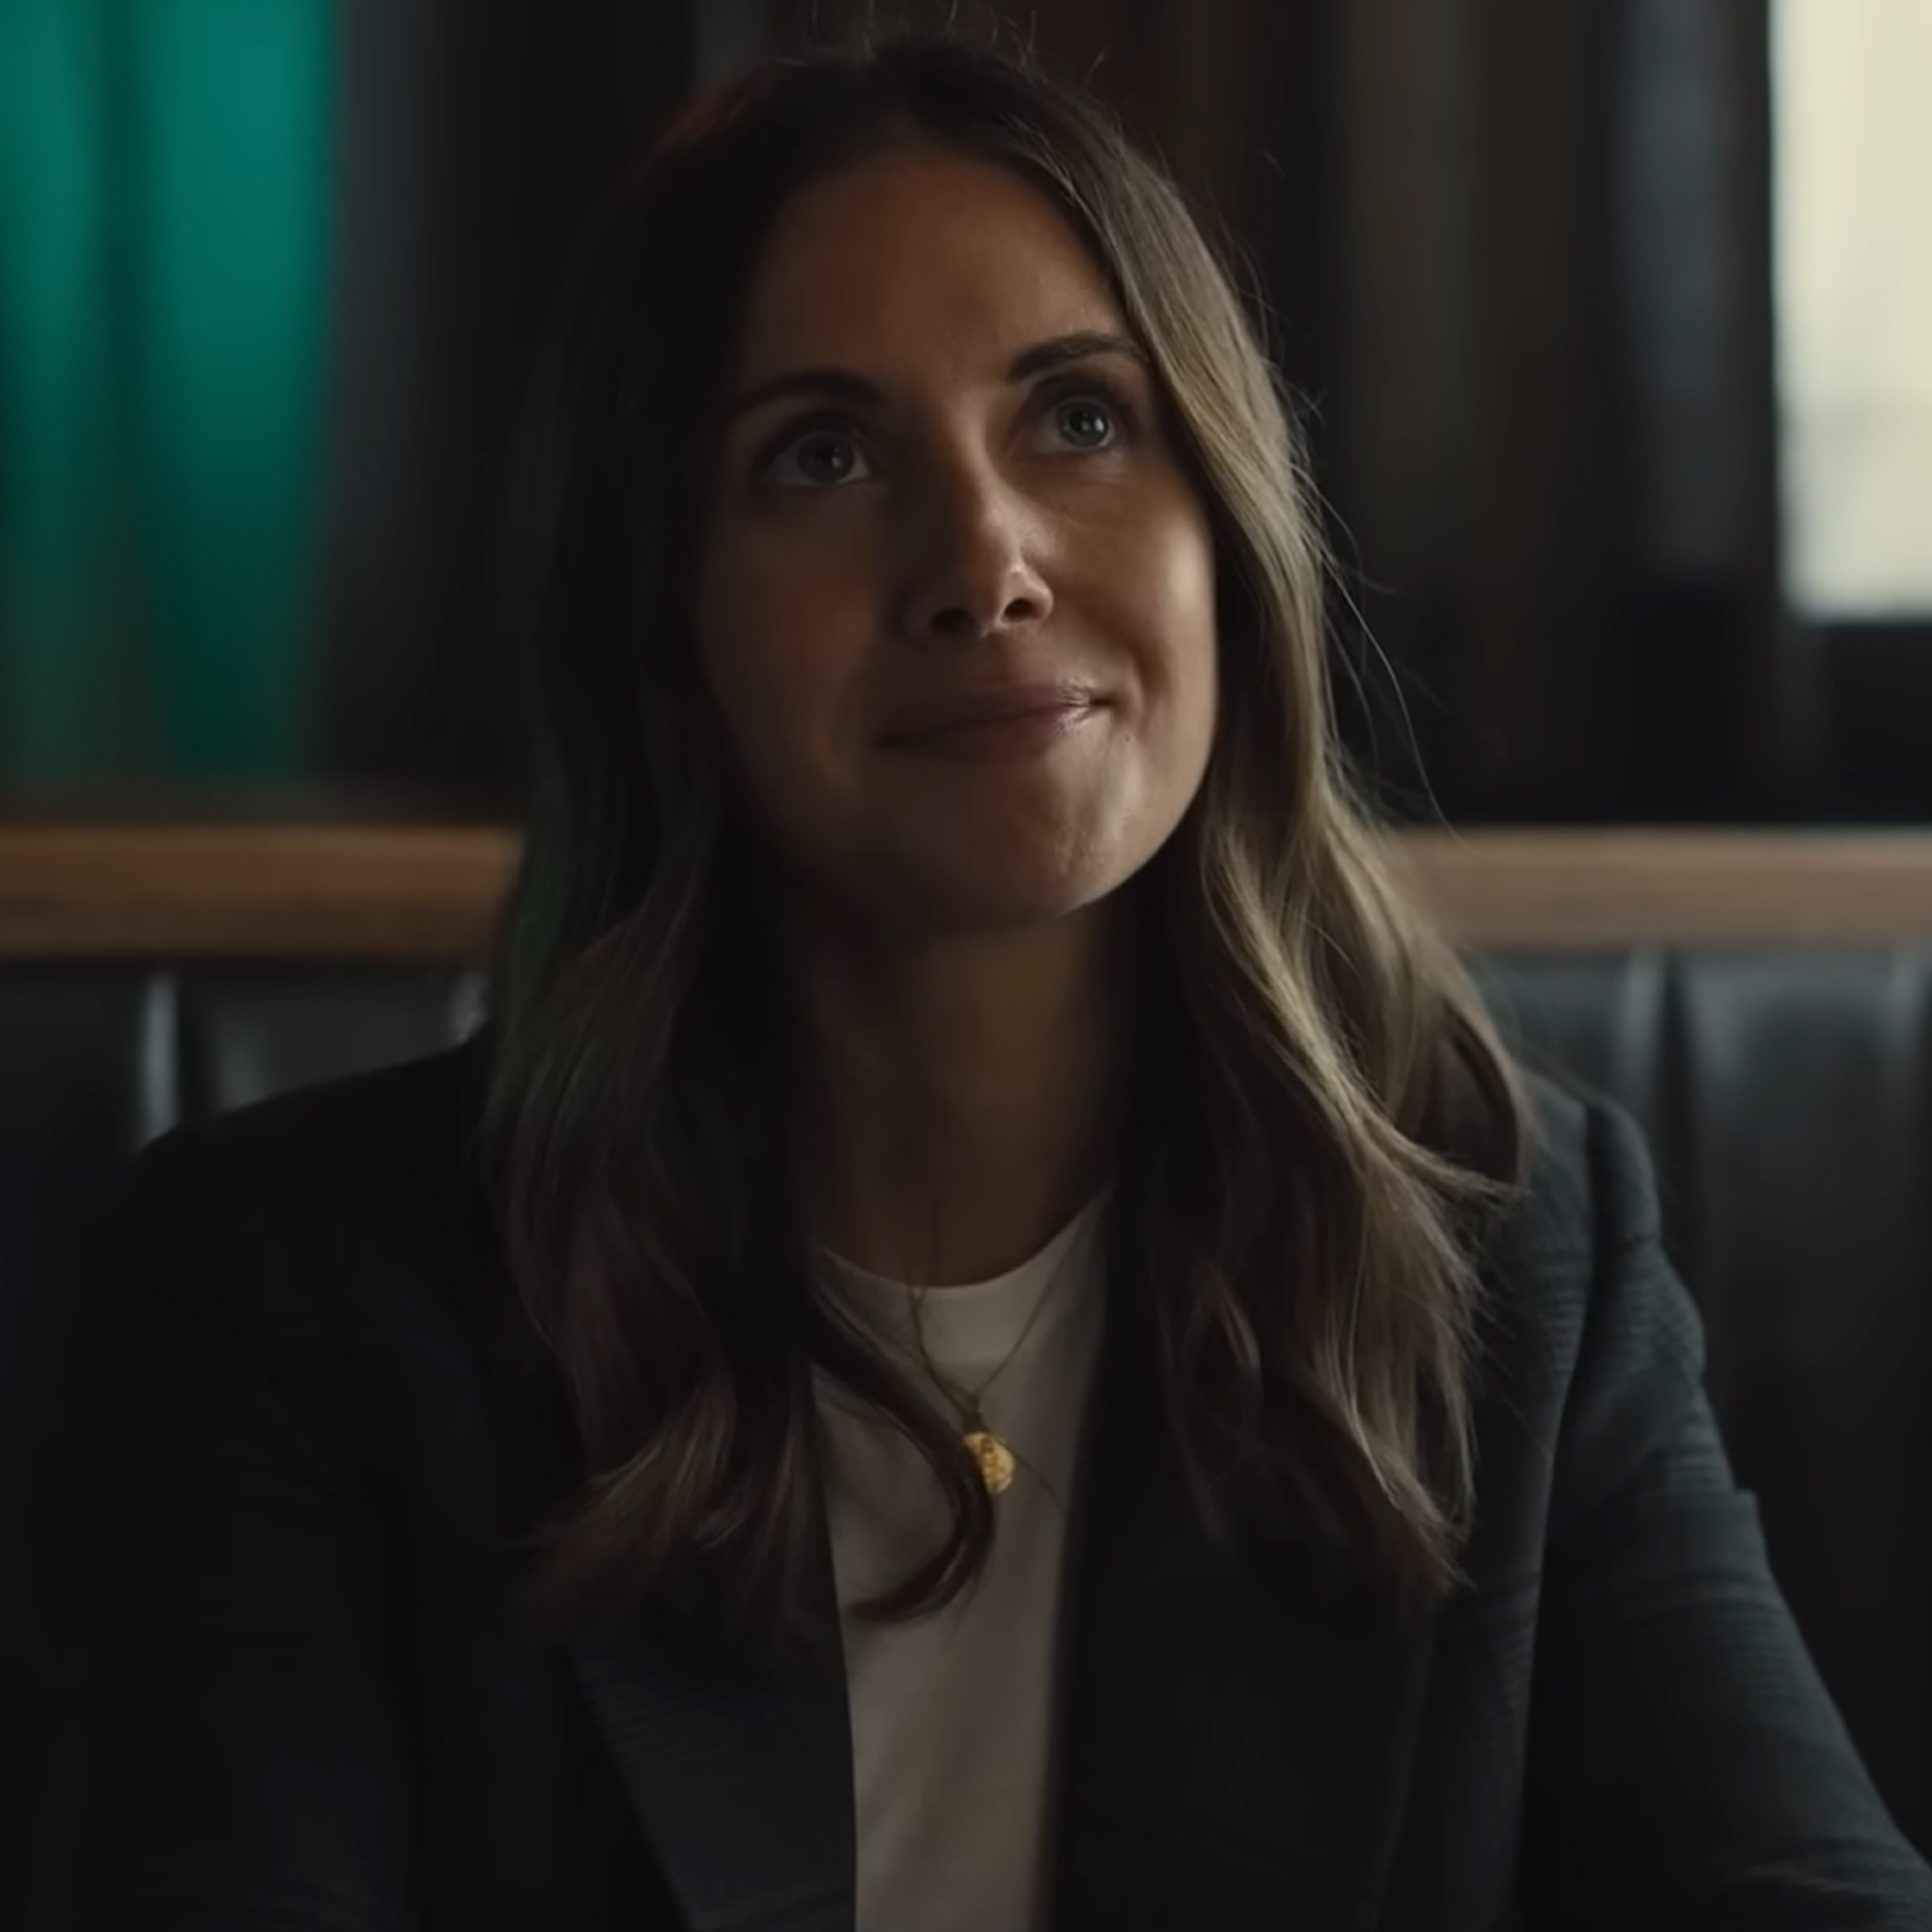 Alison Brie as Ally in Somebody I Used to Know. She's sitting in a bar booth with a subtle smile.